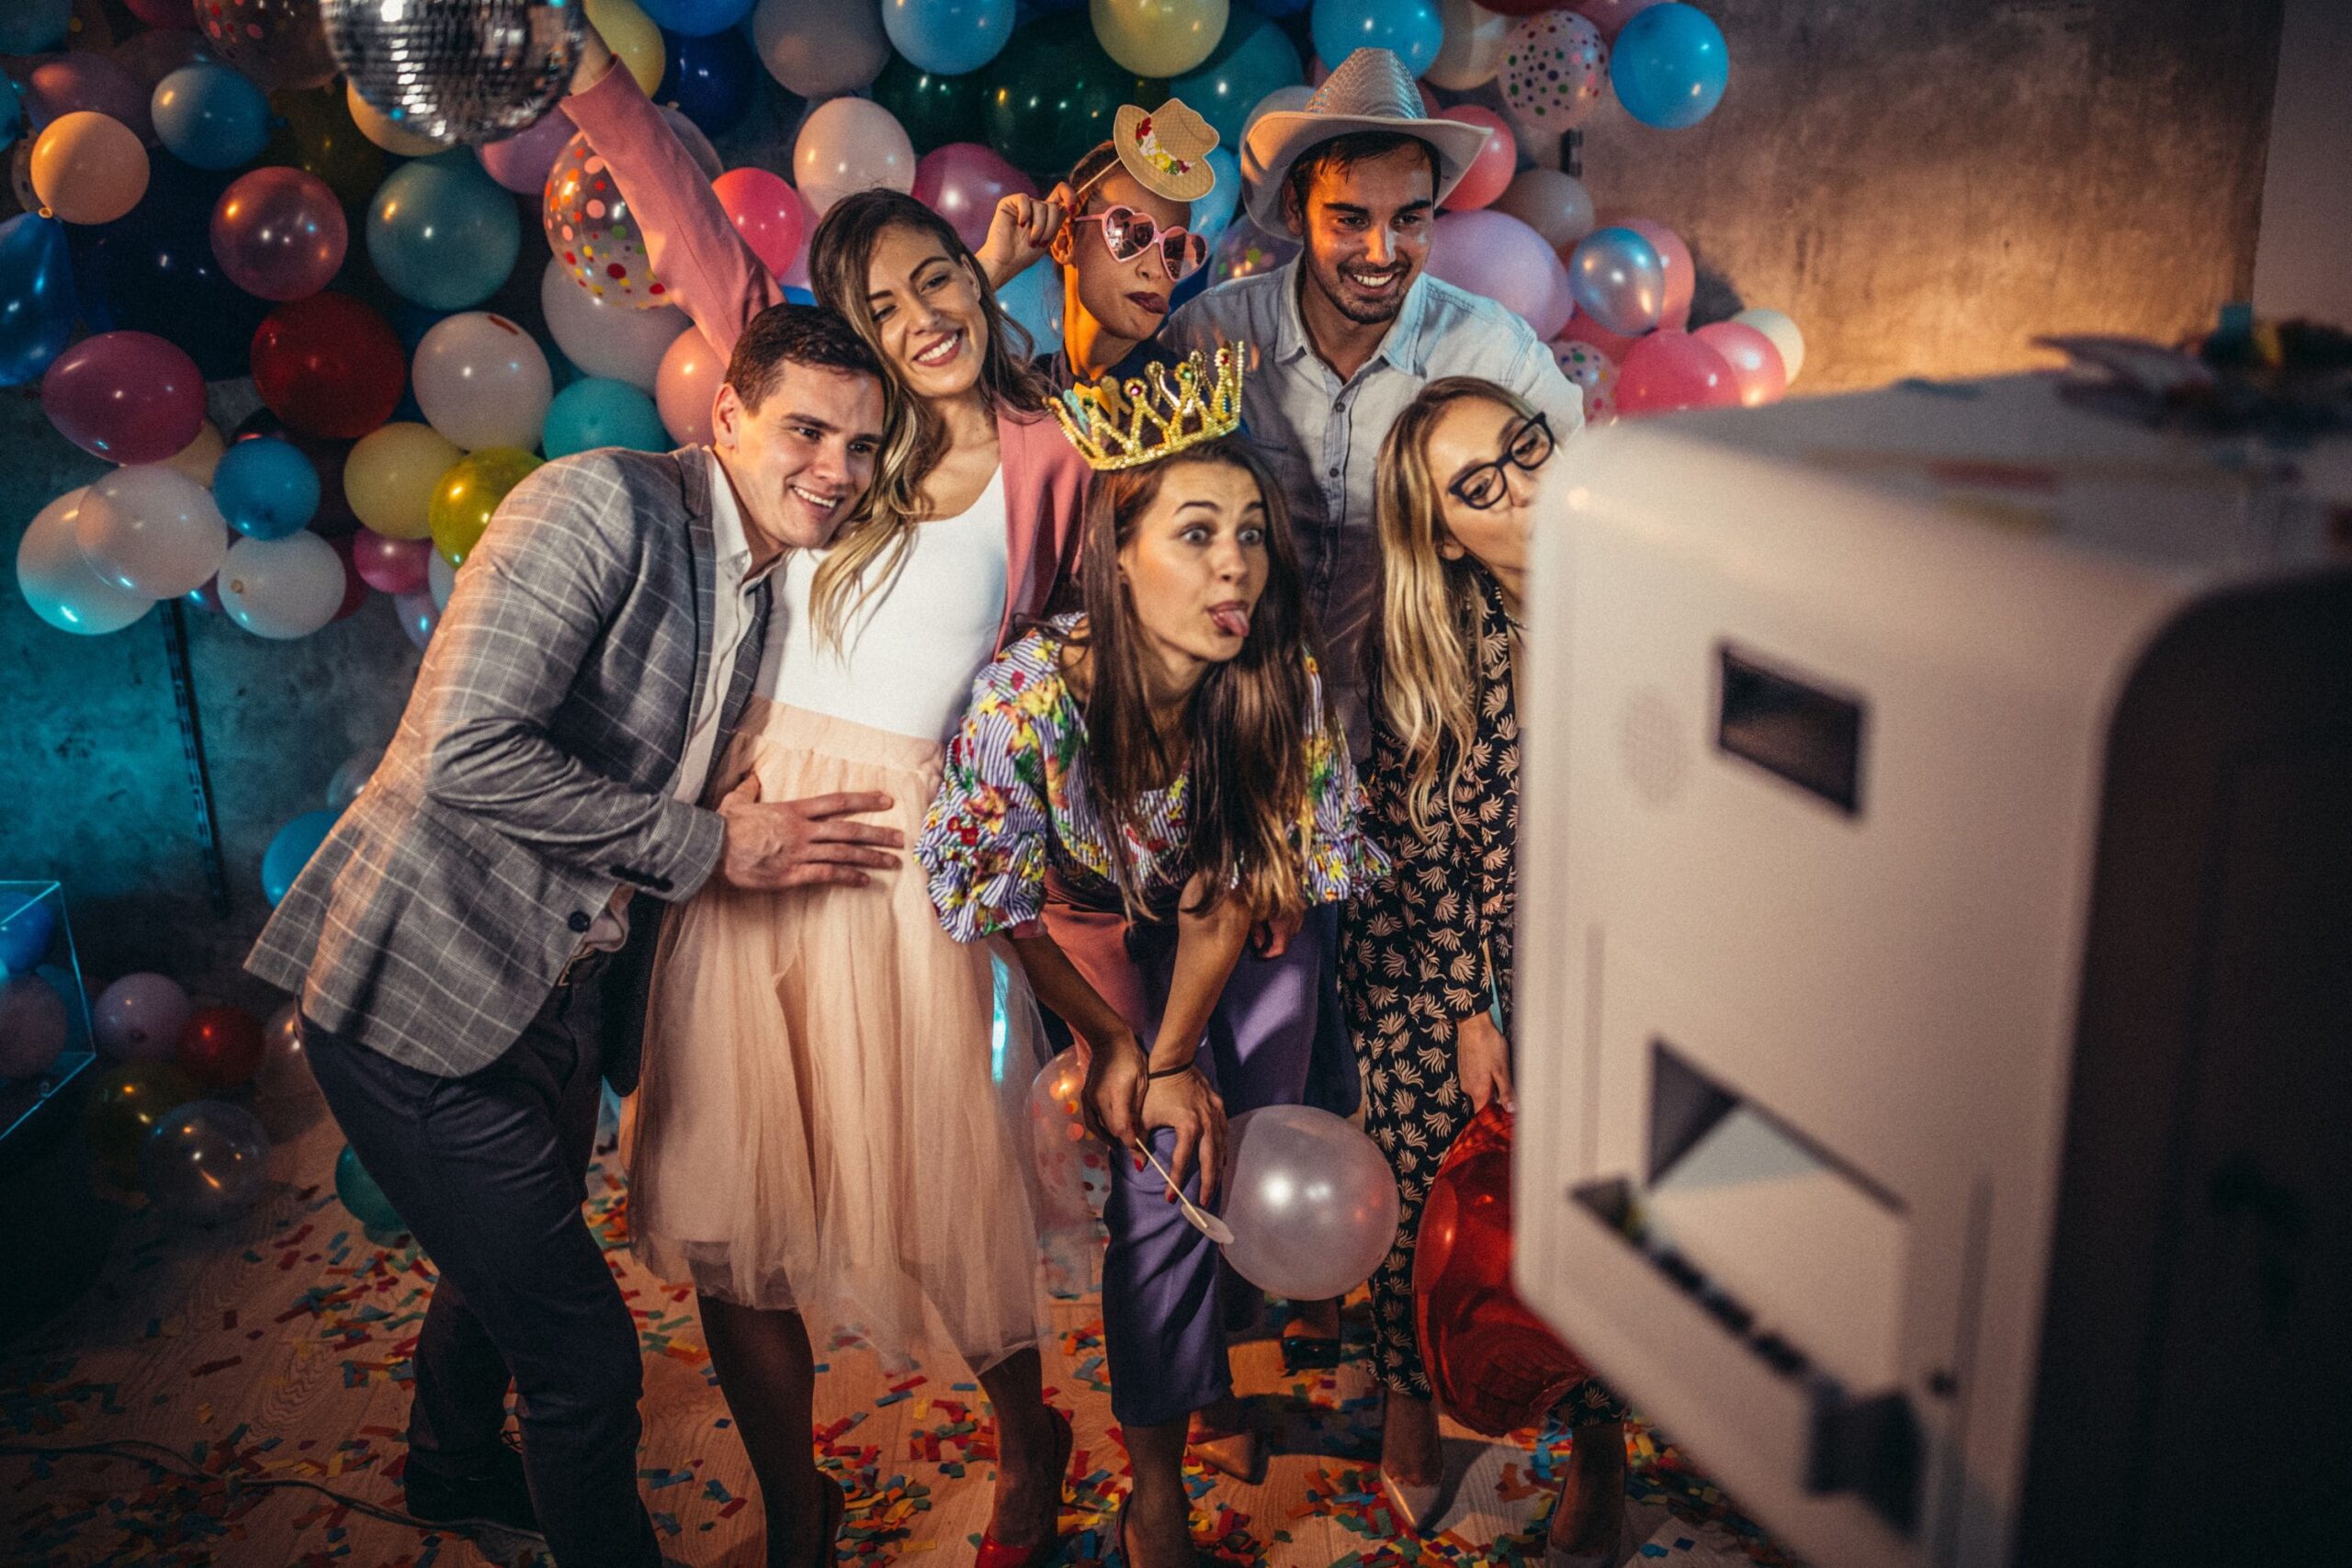 People posing in a photo booth at a surprise party.